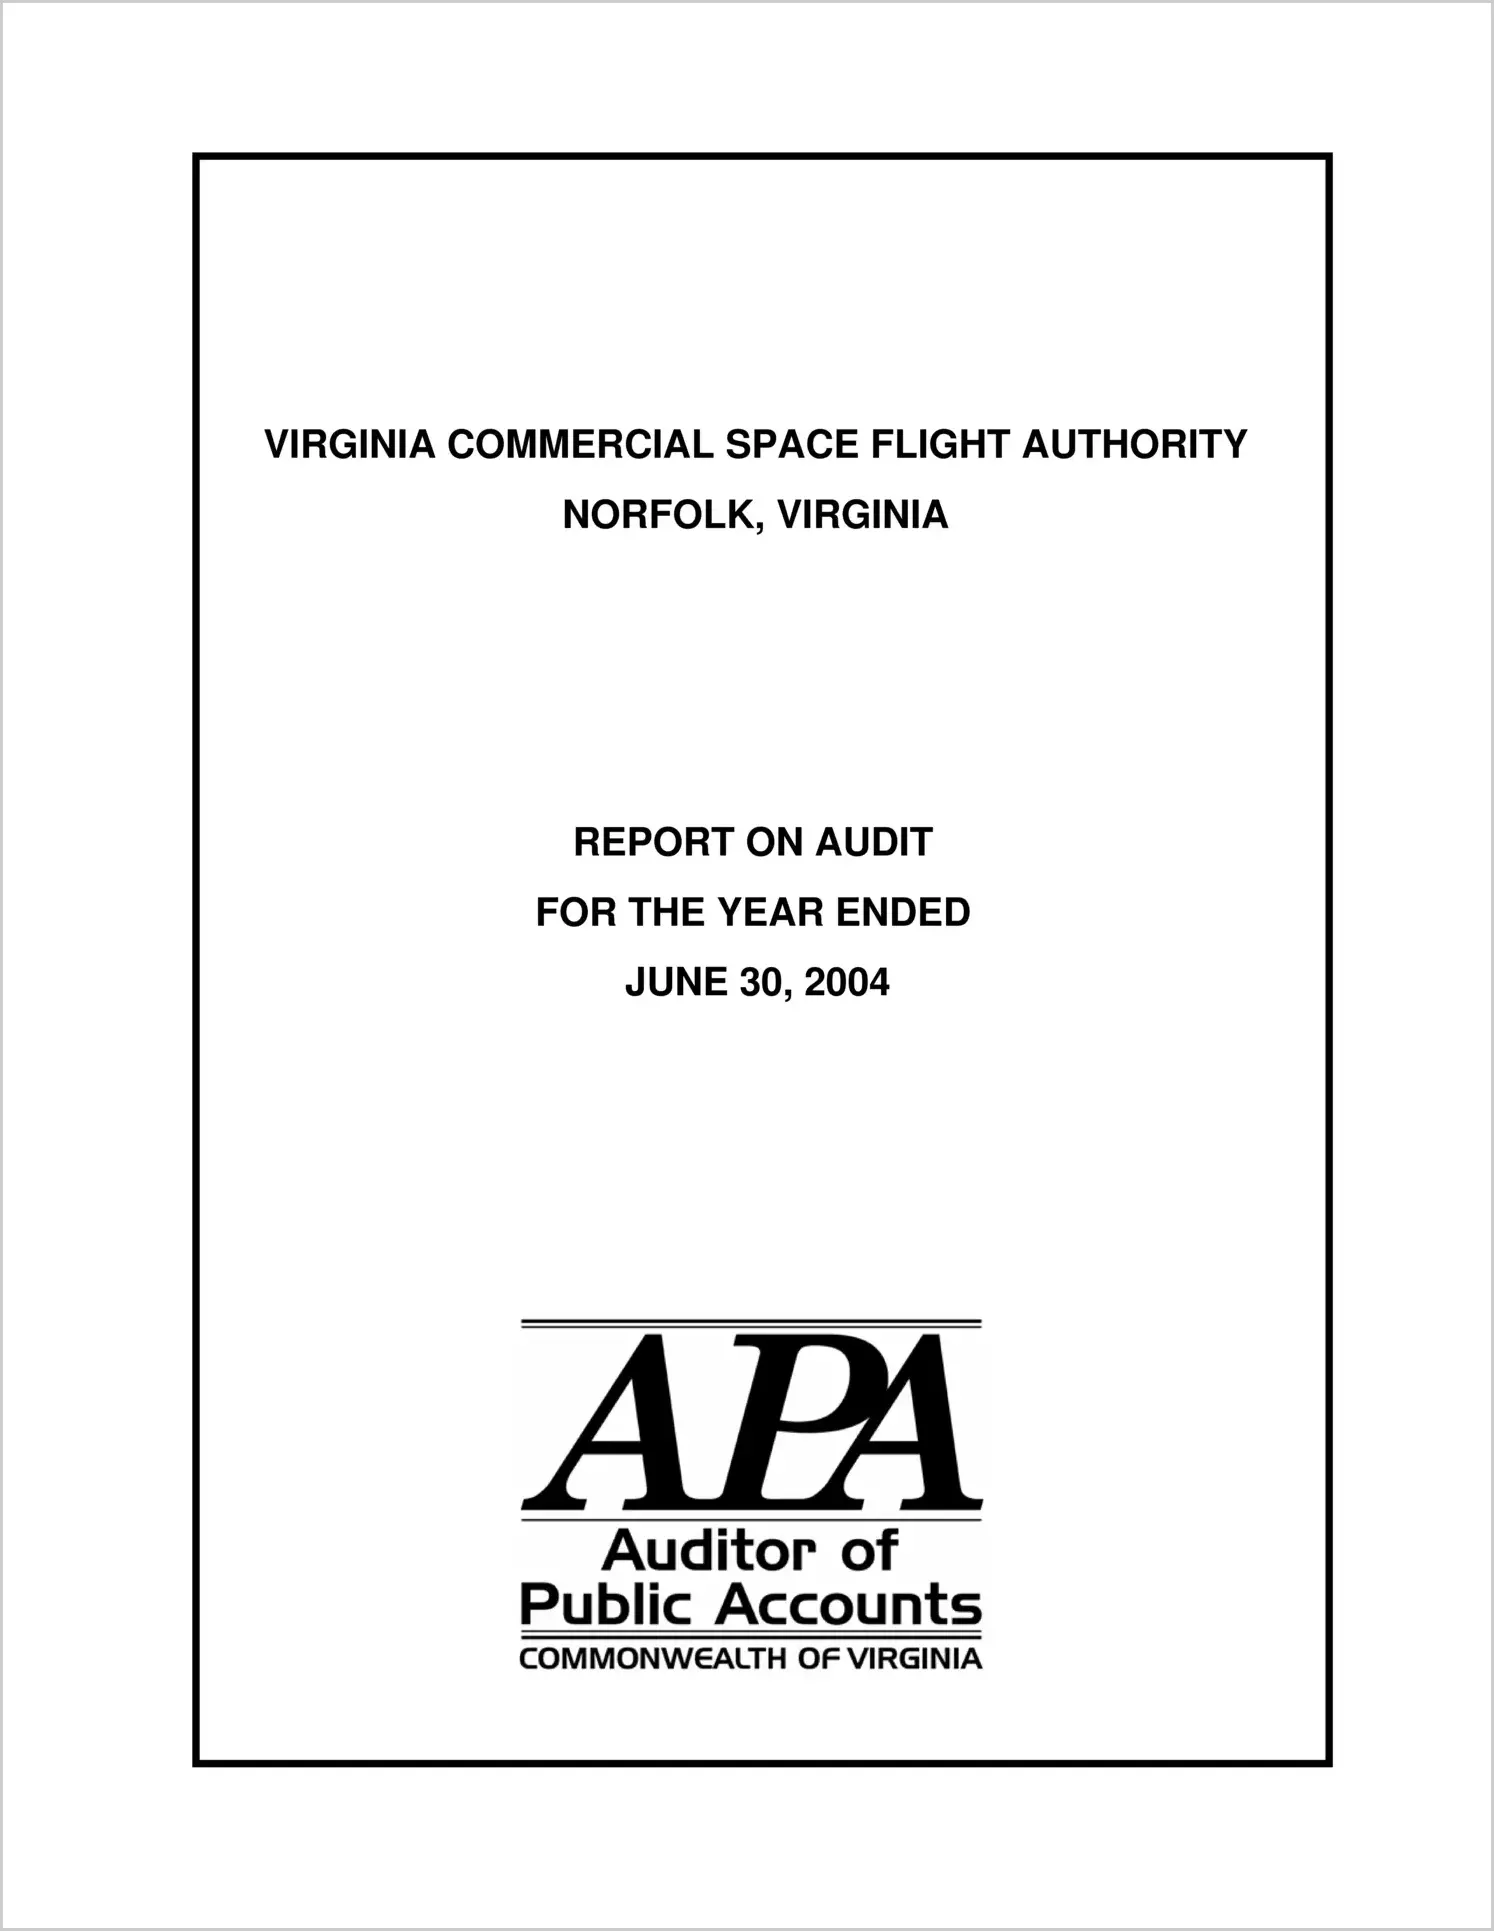 Virginia Commercial Space Flight Authority for the year ended June 30, 2004